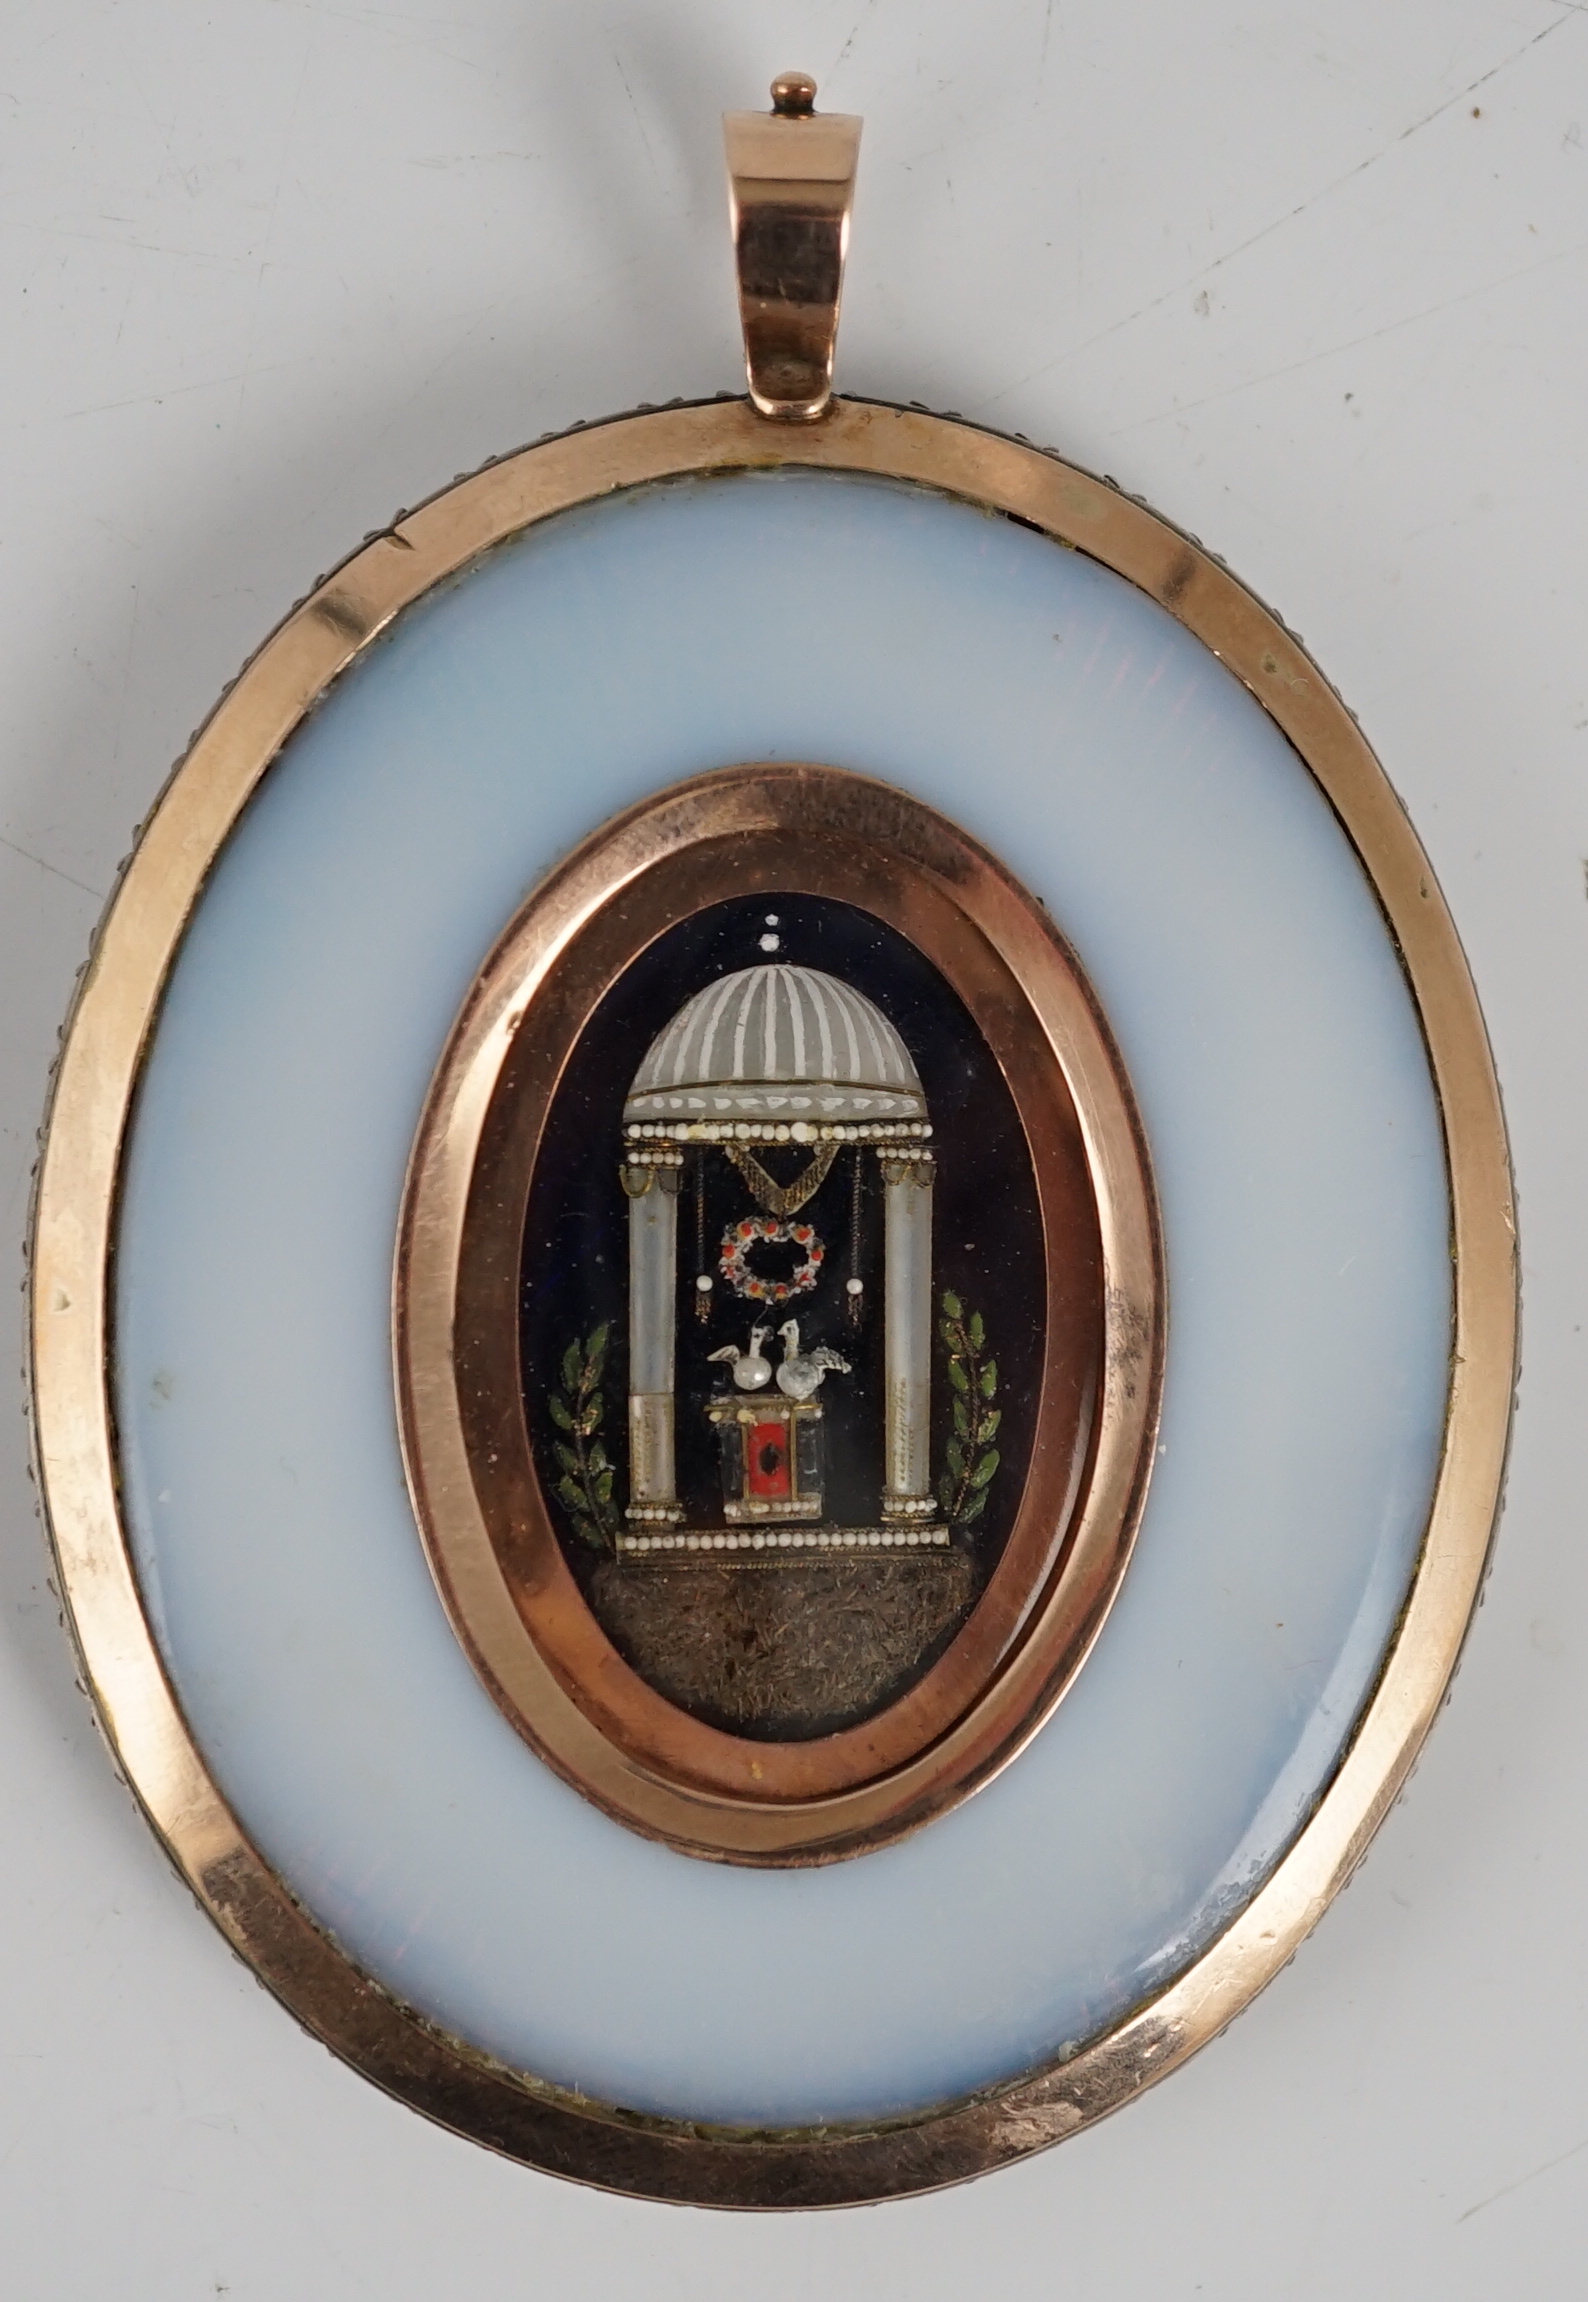 Attributed to N. Freese (British, active 1794-1814), Portrait miniature of a lady, oil on ivory, 6.5 x 5.3cm. CITES Submission reference DPWH5JDK